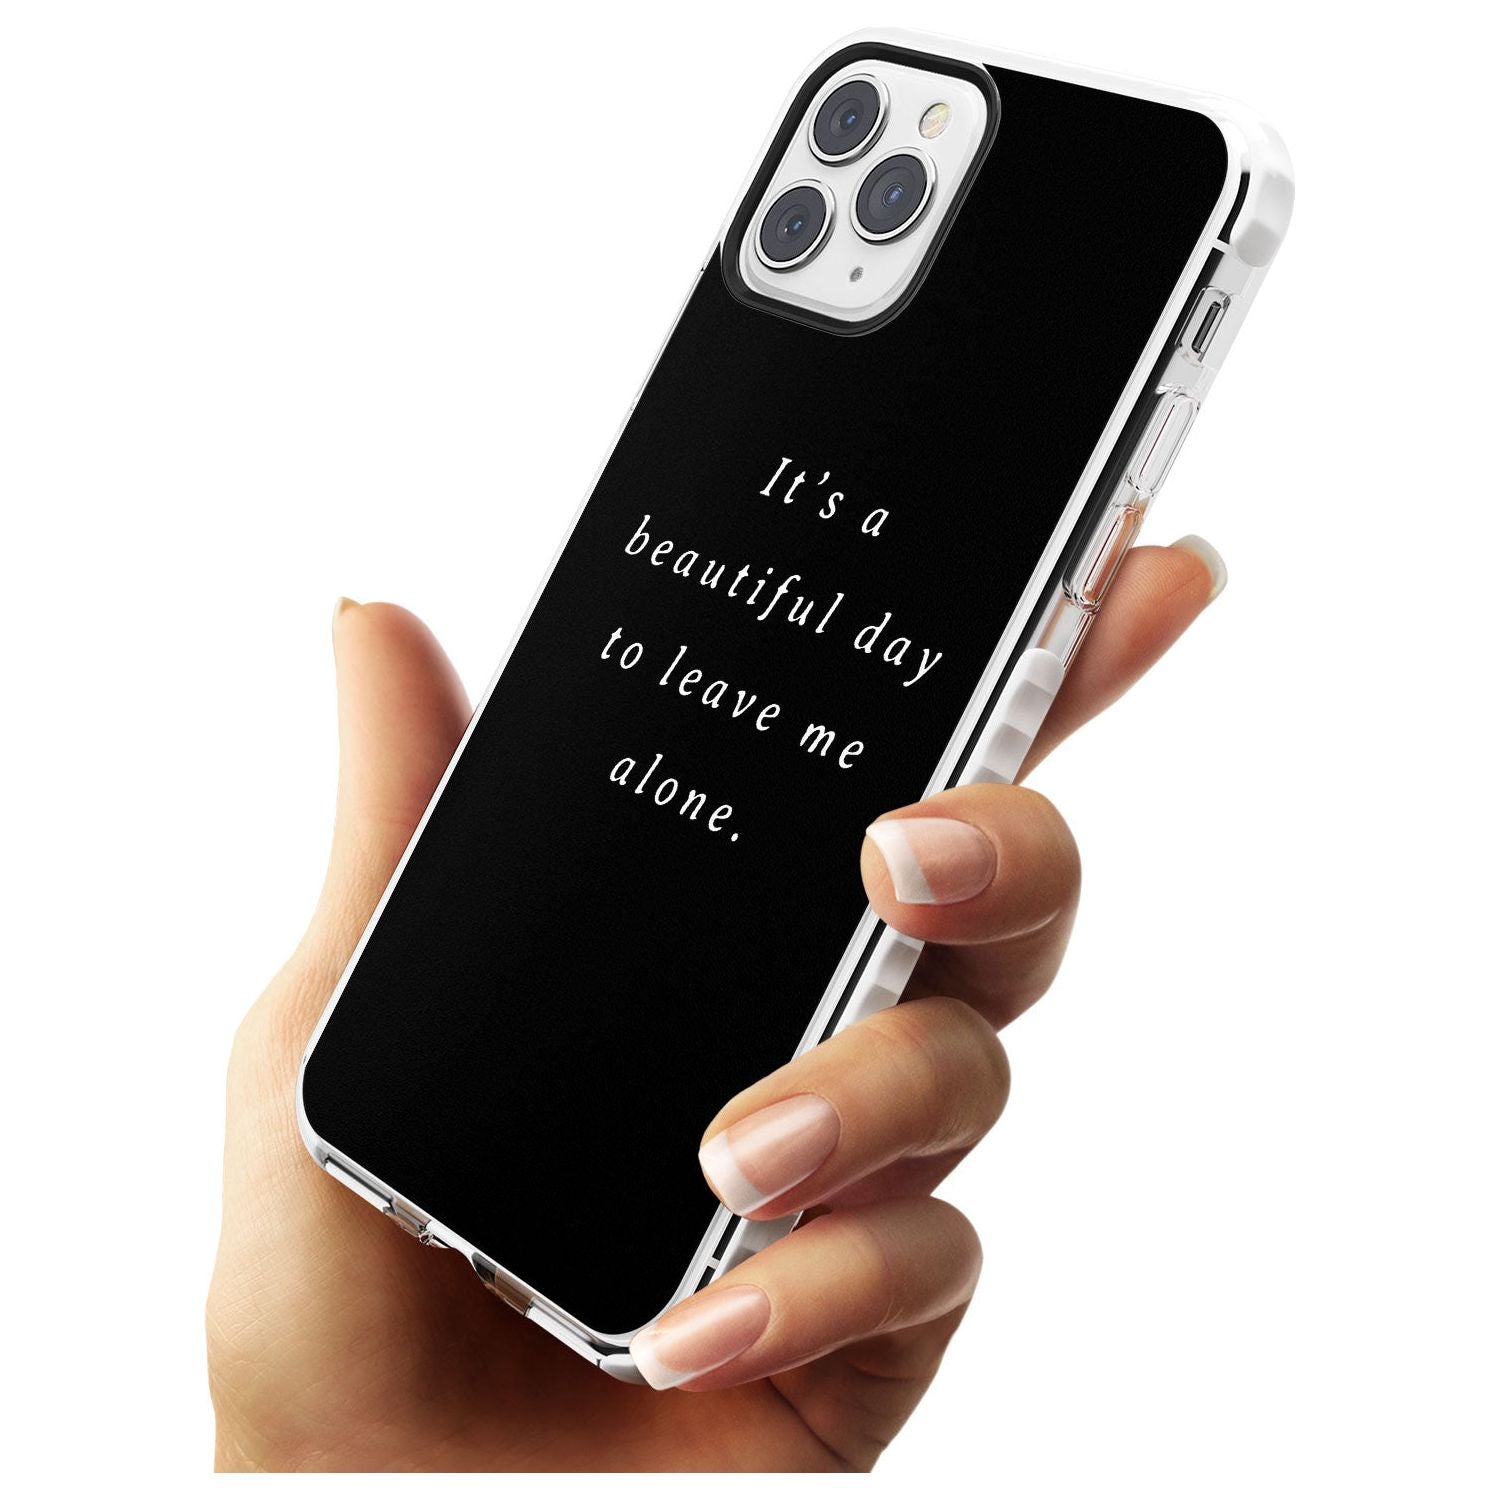 Leave me alone Impact Phone Case for iPhone 11 Pro Max